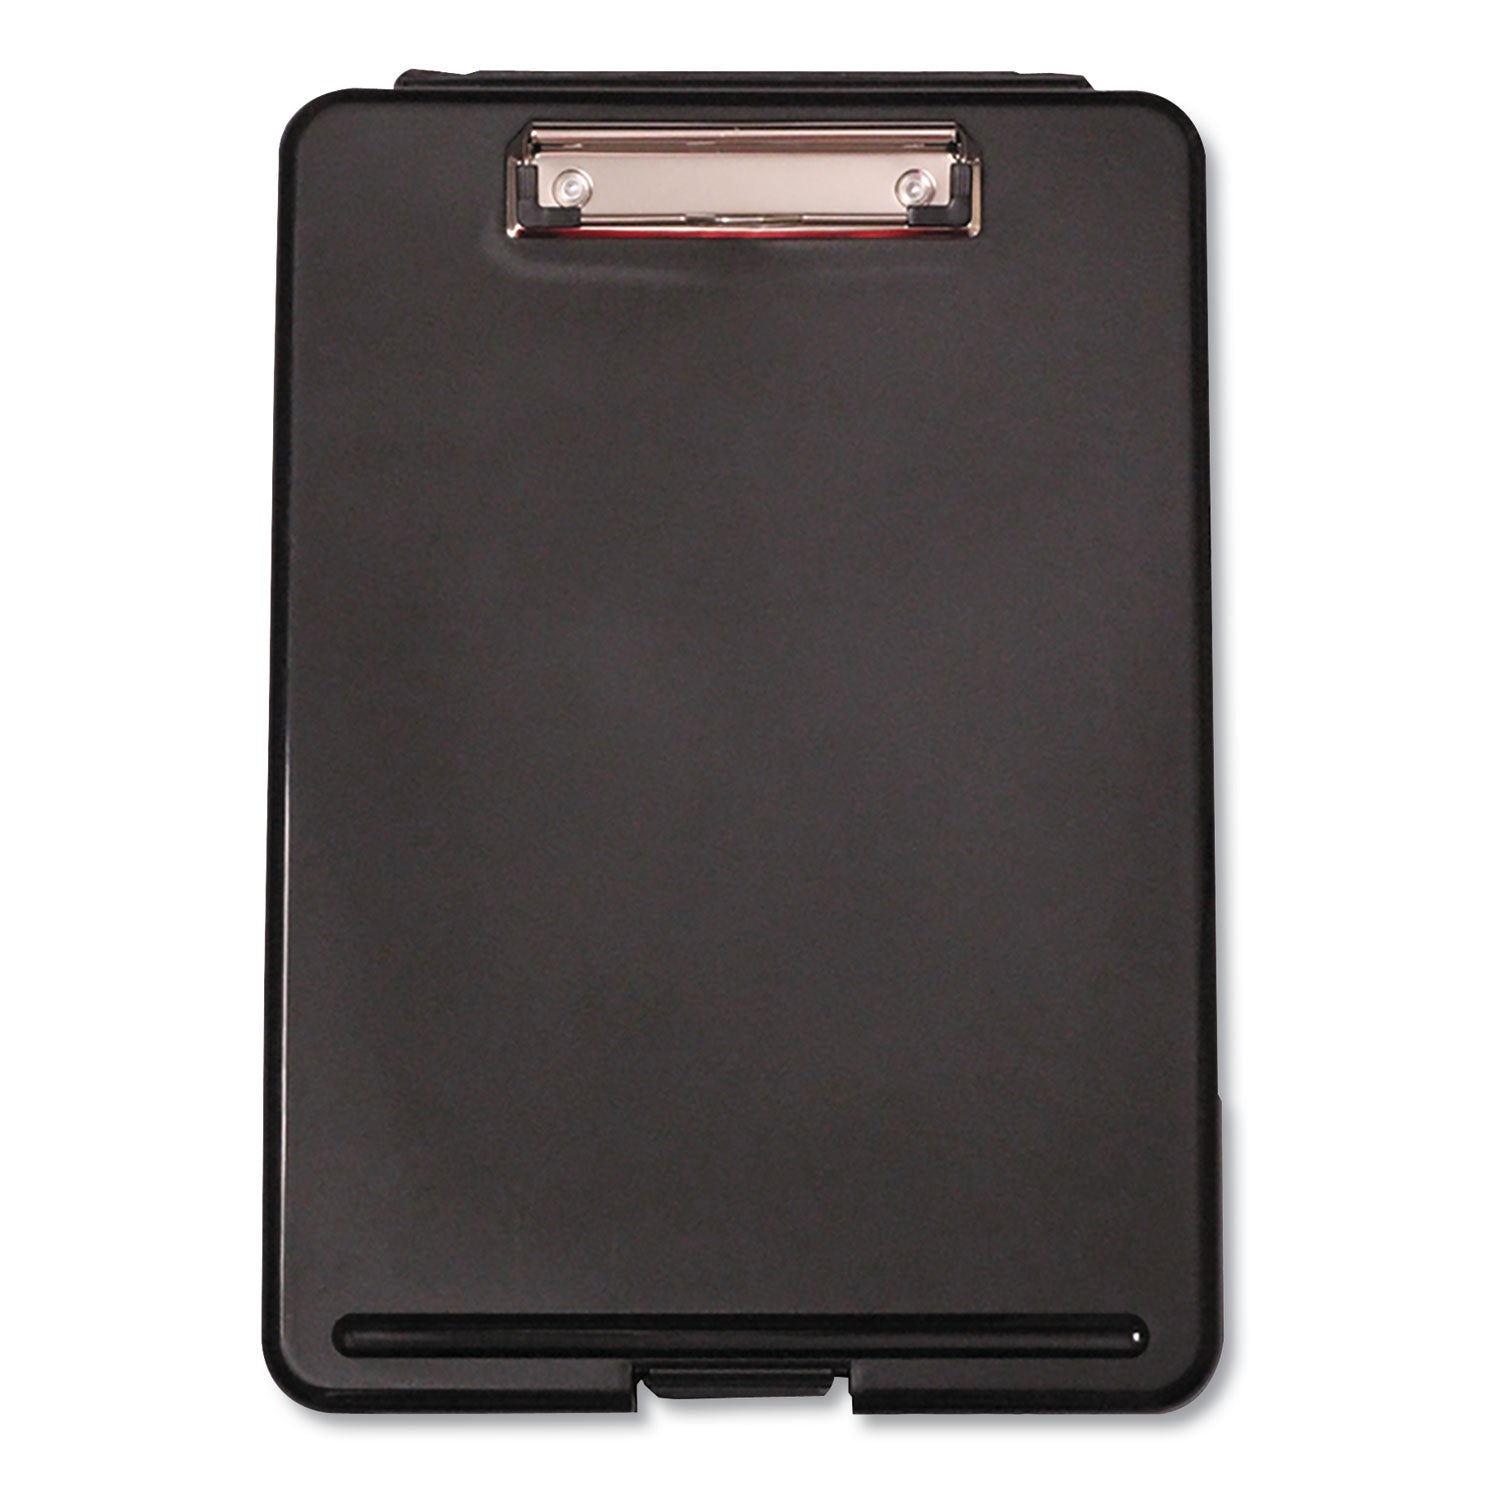 storage-clipboard-05-clip-capacity-holds-85-x-11-sheets-black_unv40318 - 1